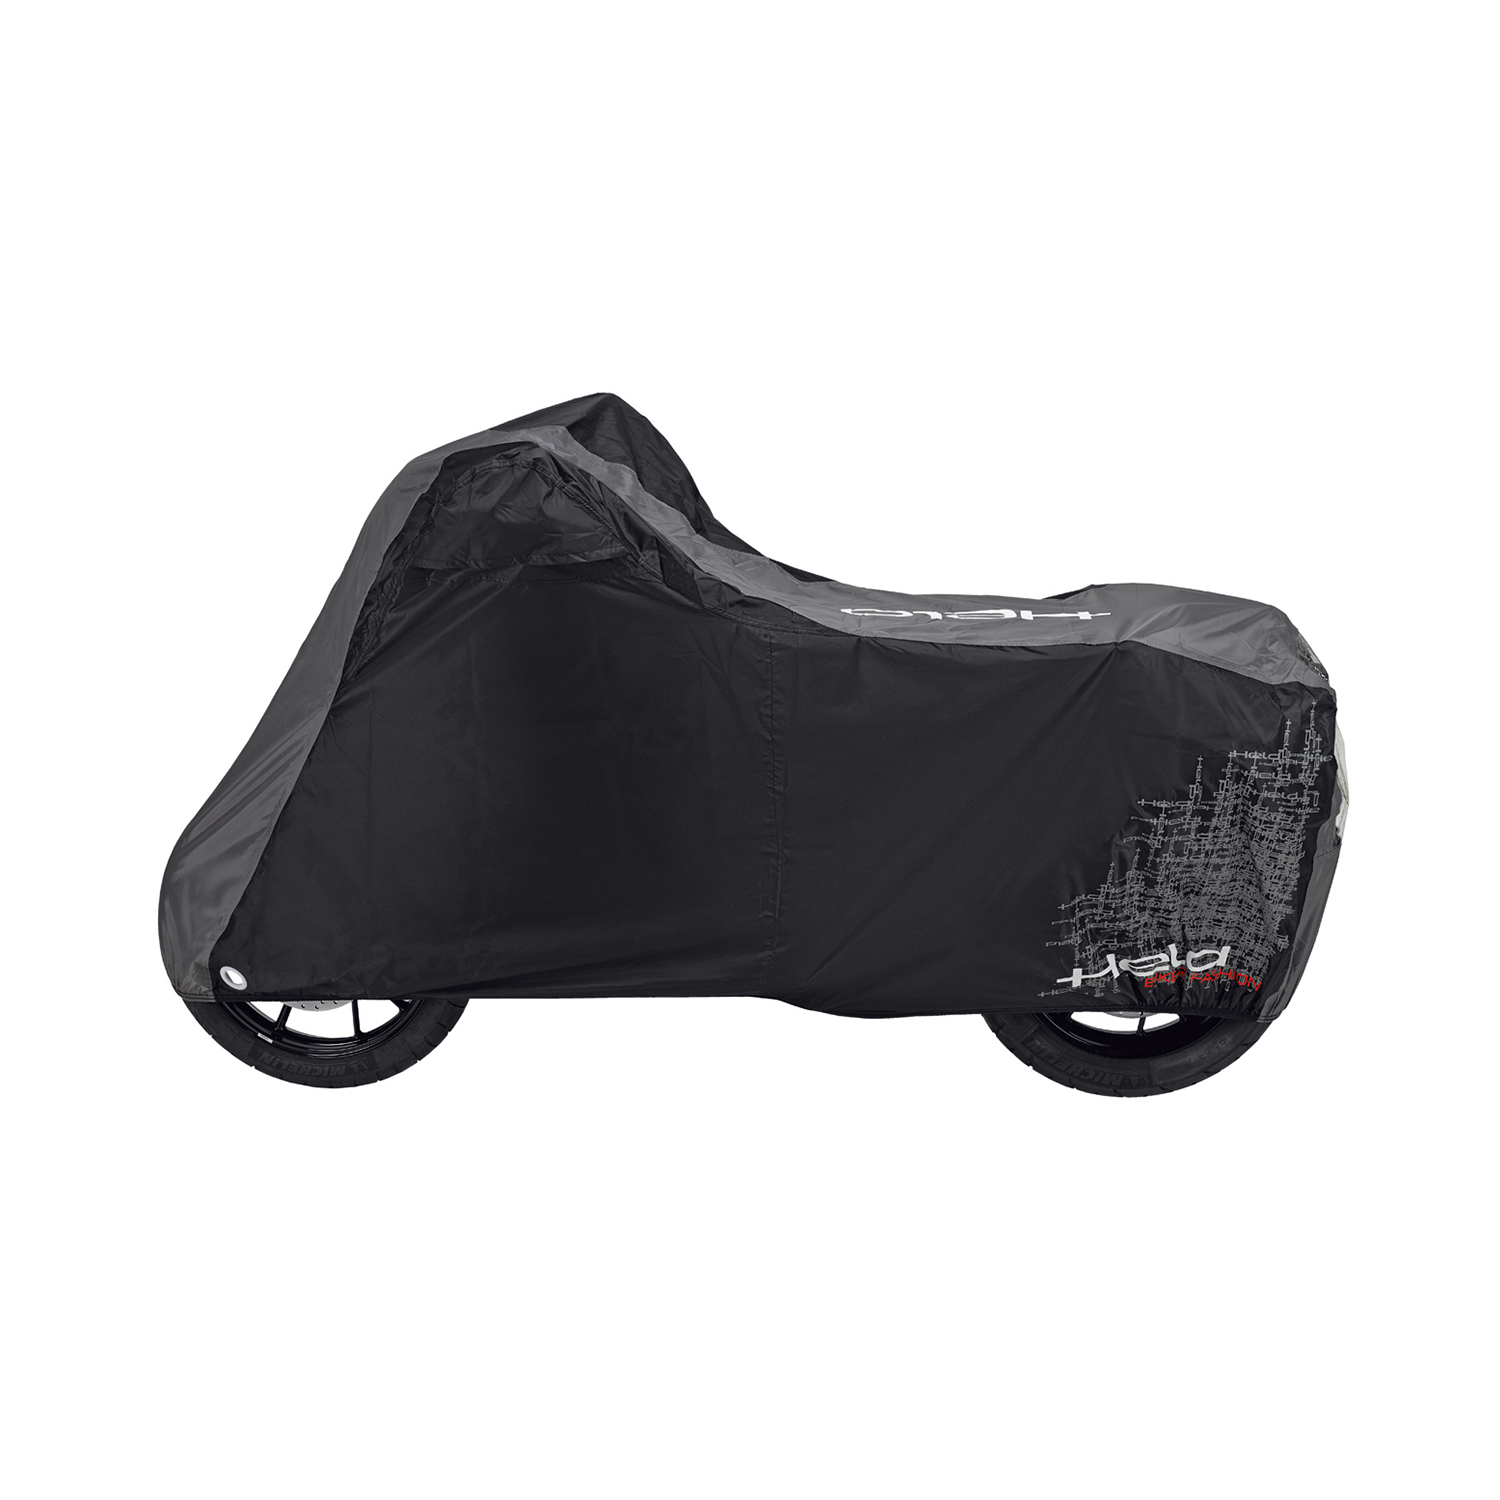 Held Bike Cover Advanced - Available in Various Sizes